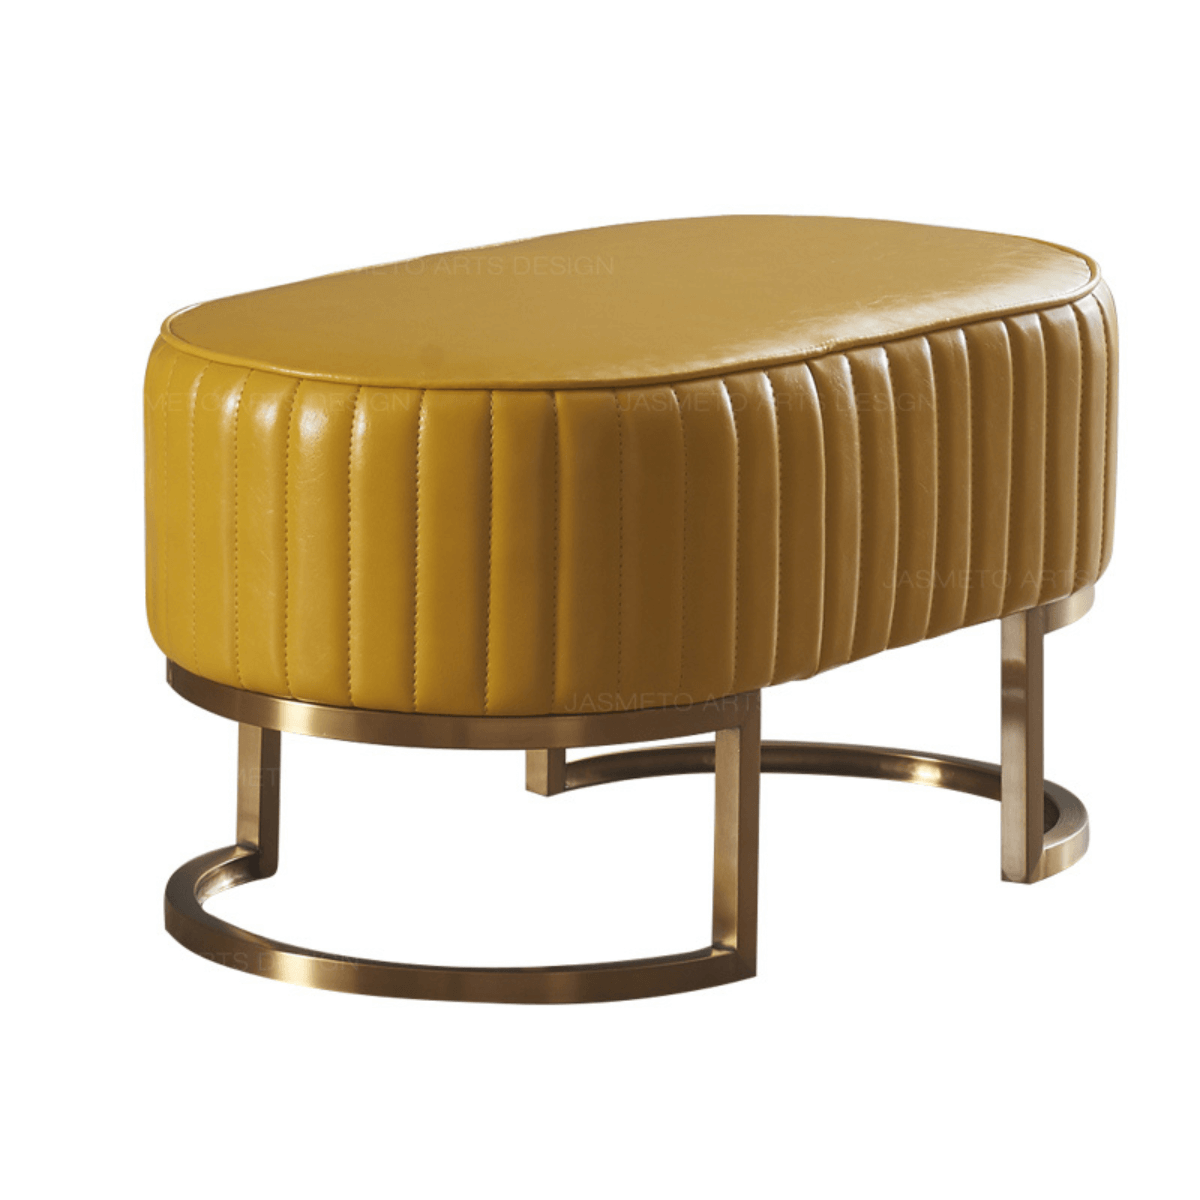 Shell Leather Oval Bench with Golden Half-moon Base 1